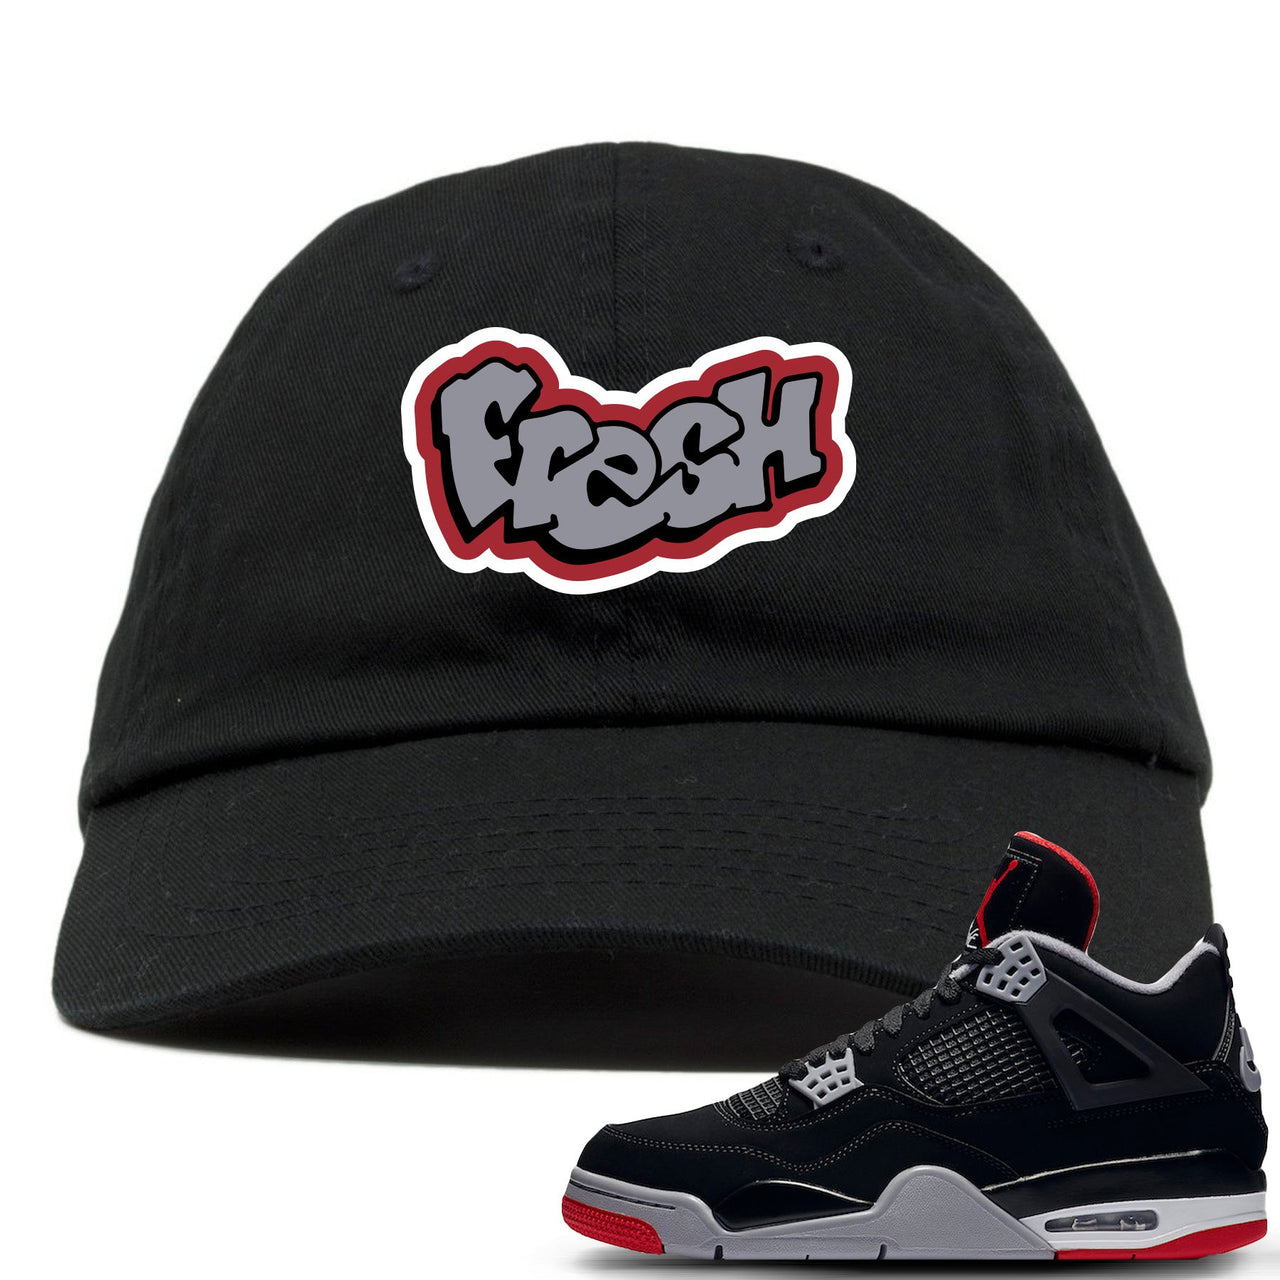 This black and grey dad hat will match great with you Air Jordan 4 Bred shoes